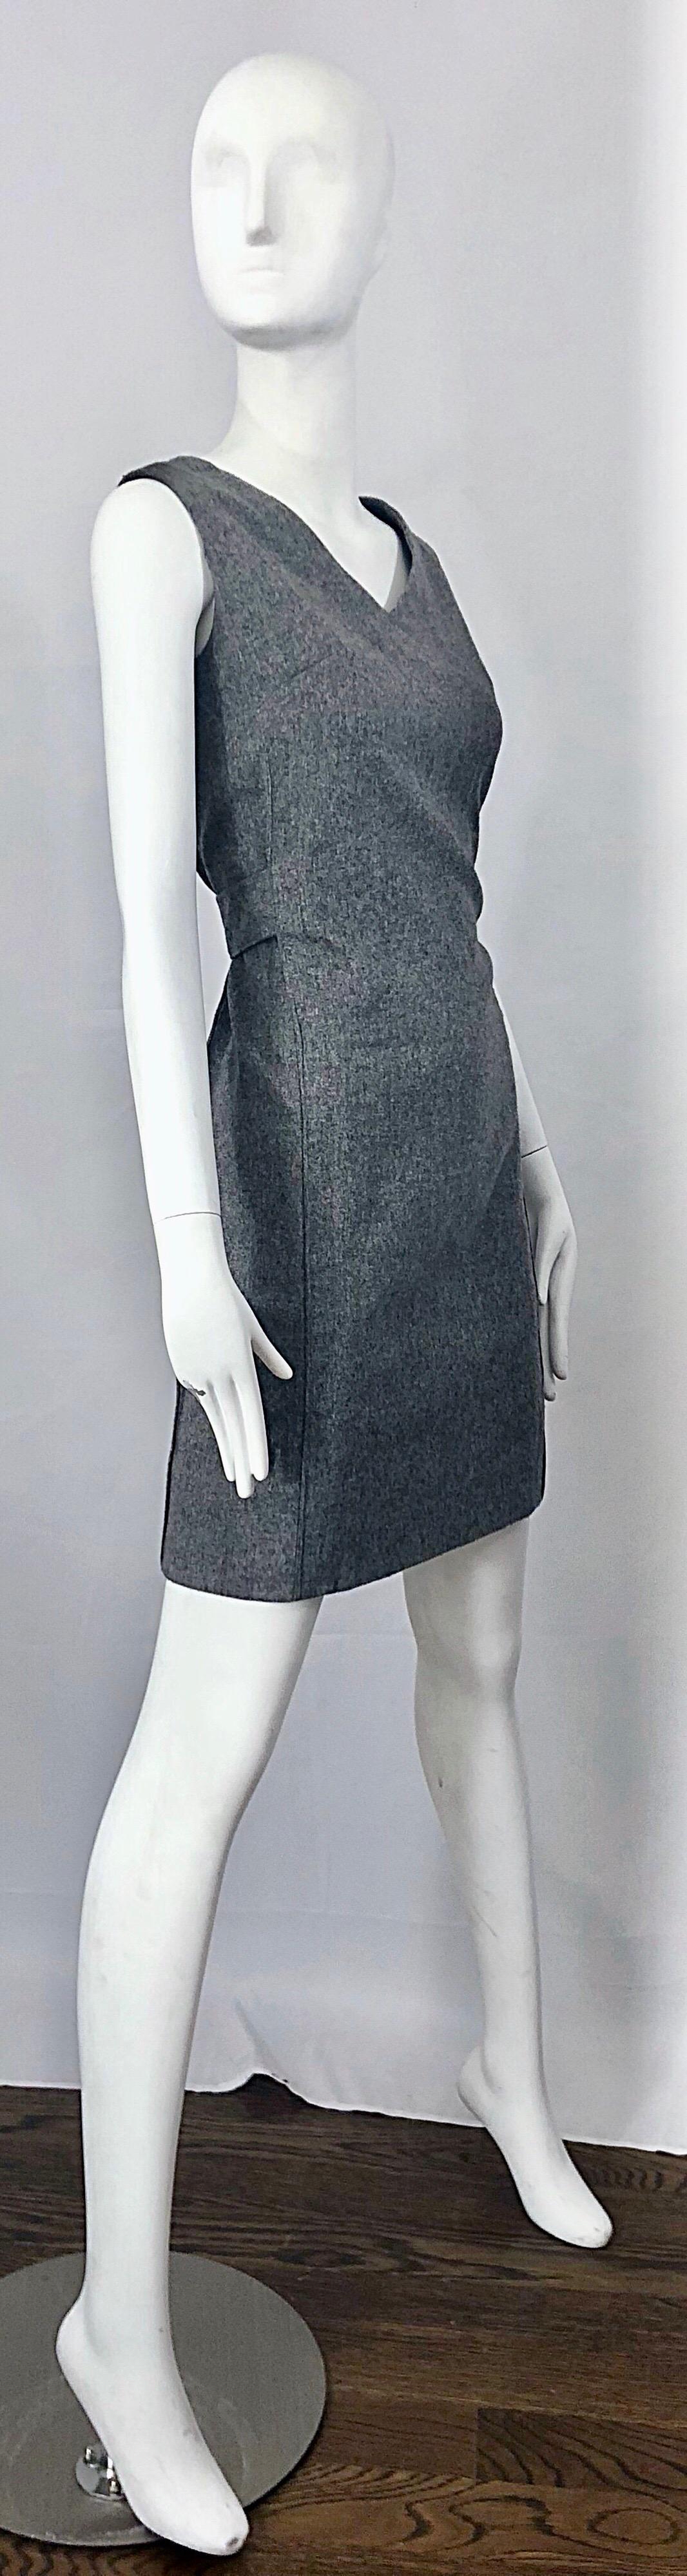 Women's Chic 1960s Heather Gray Wool Sleeveless Vintage 60s Mod Shift Dress For Sale